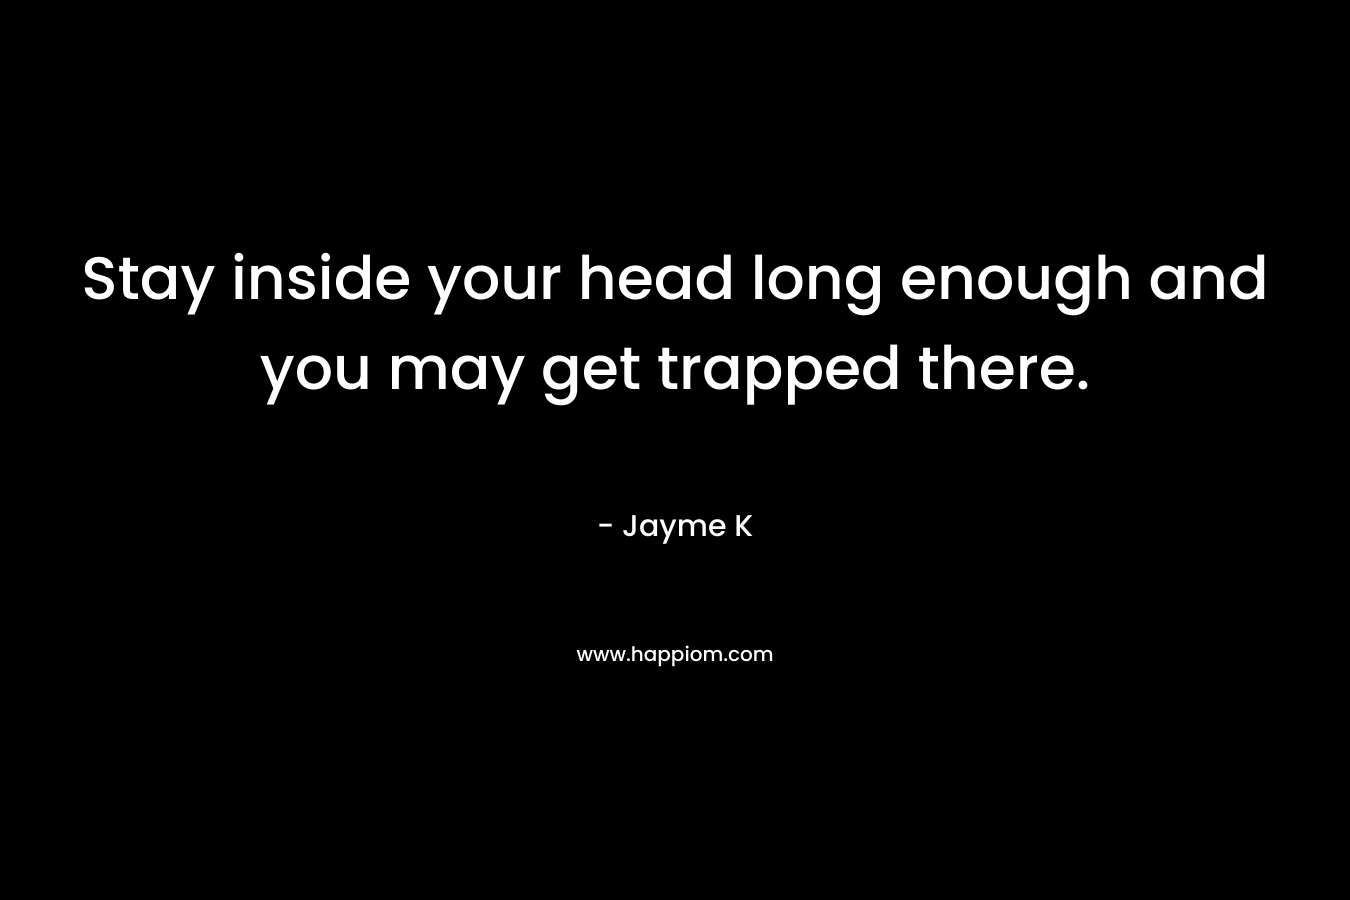 Stay inside your head long enough and you may get trapped there. – Jayme K